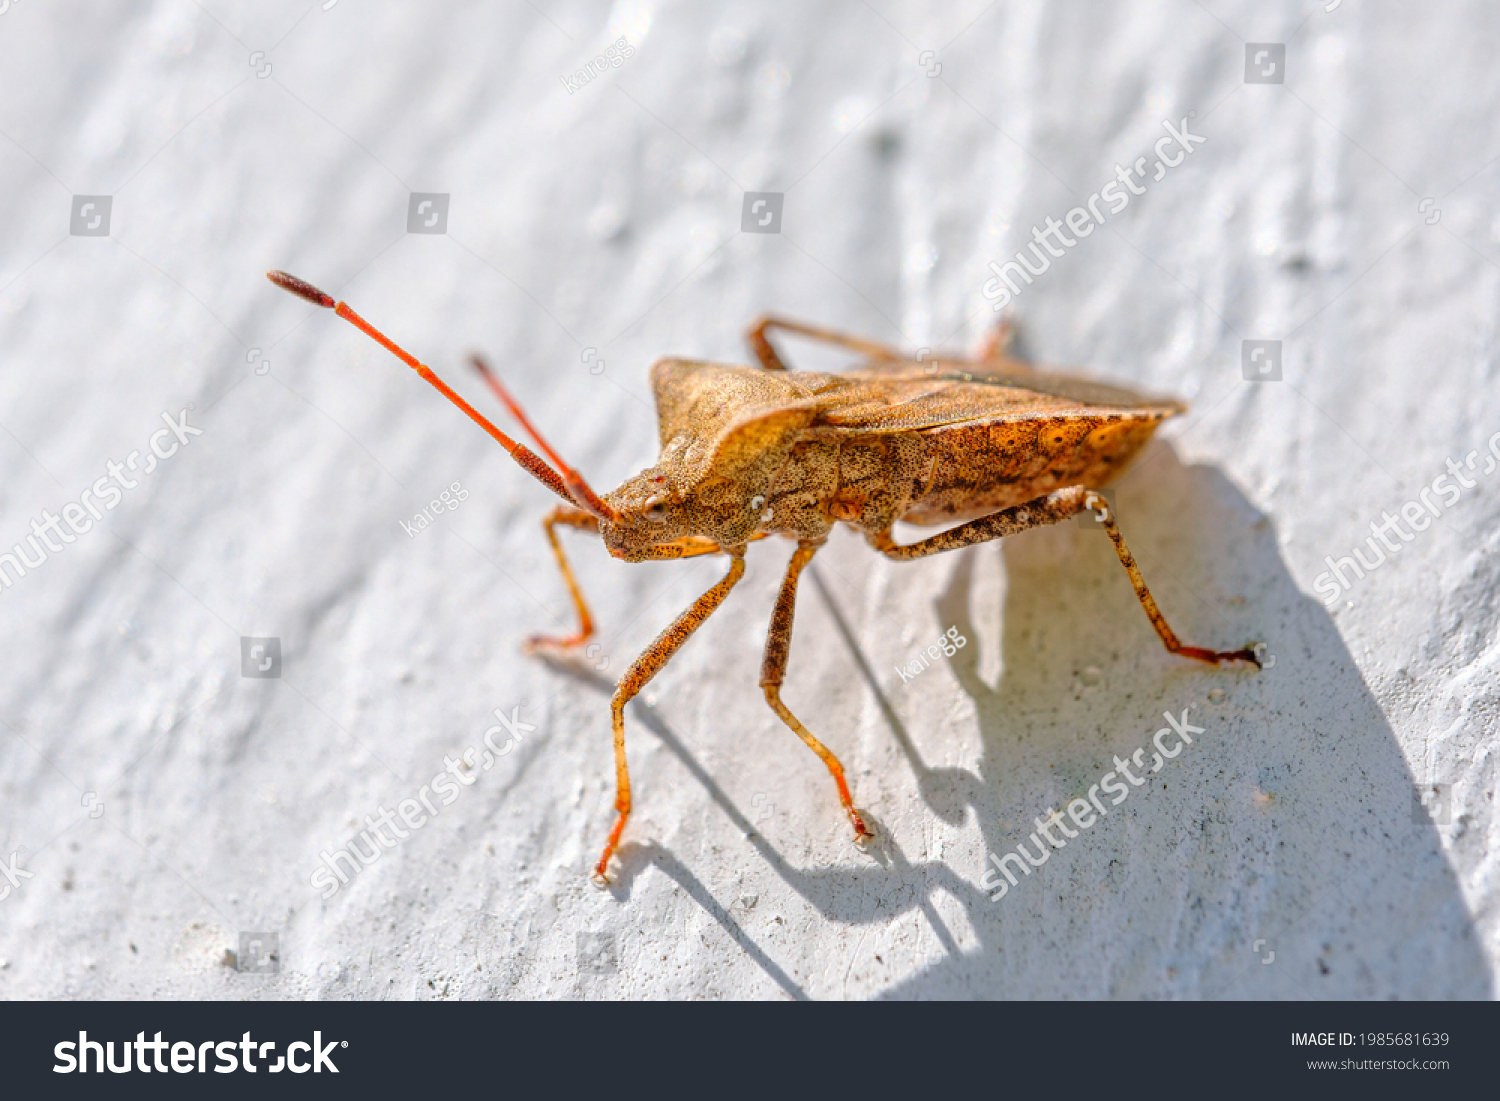 an orange-brown leather bug crawls on white wooden wall #1985681639